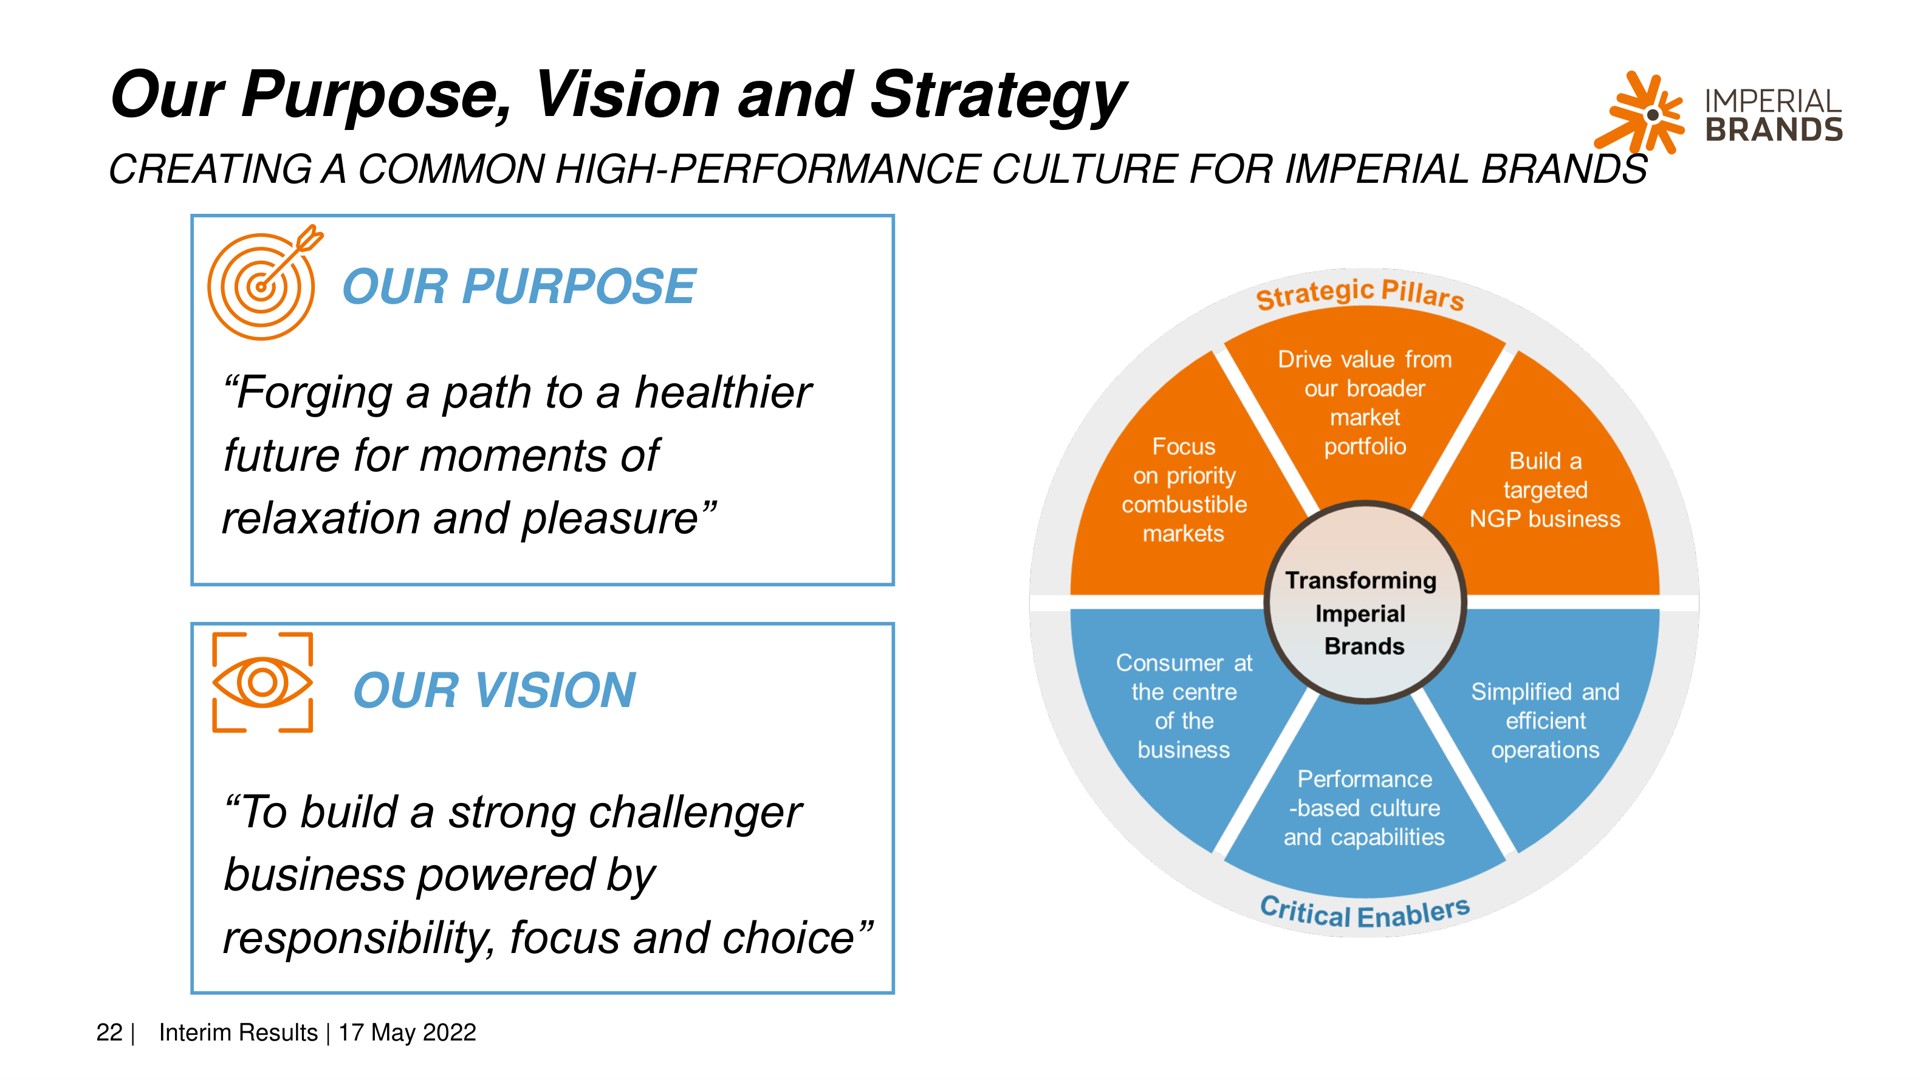 our purpose vision and strategy our purpose forging a path to a future for moments of relaxation and pleasure our vision to build a strong challenger business powered by responsibility focus and choice me imperial | Imperial Brands